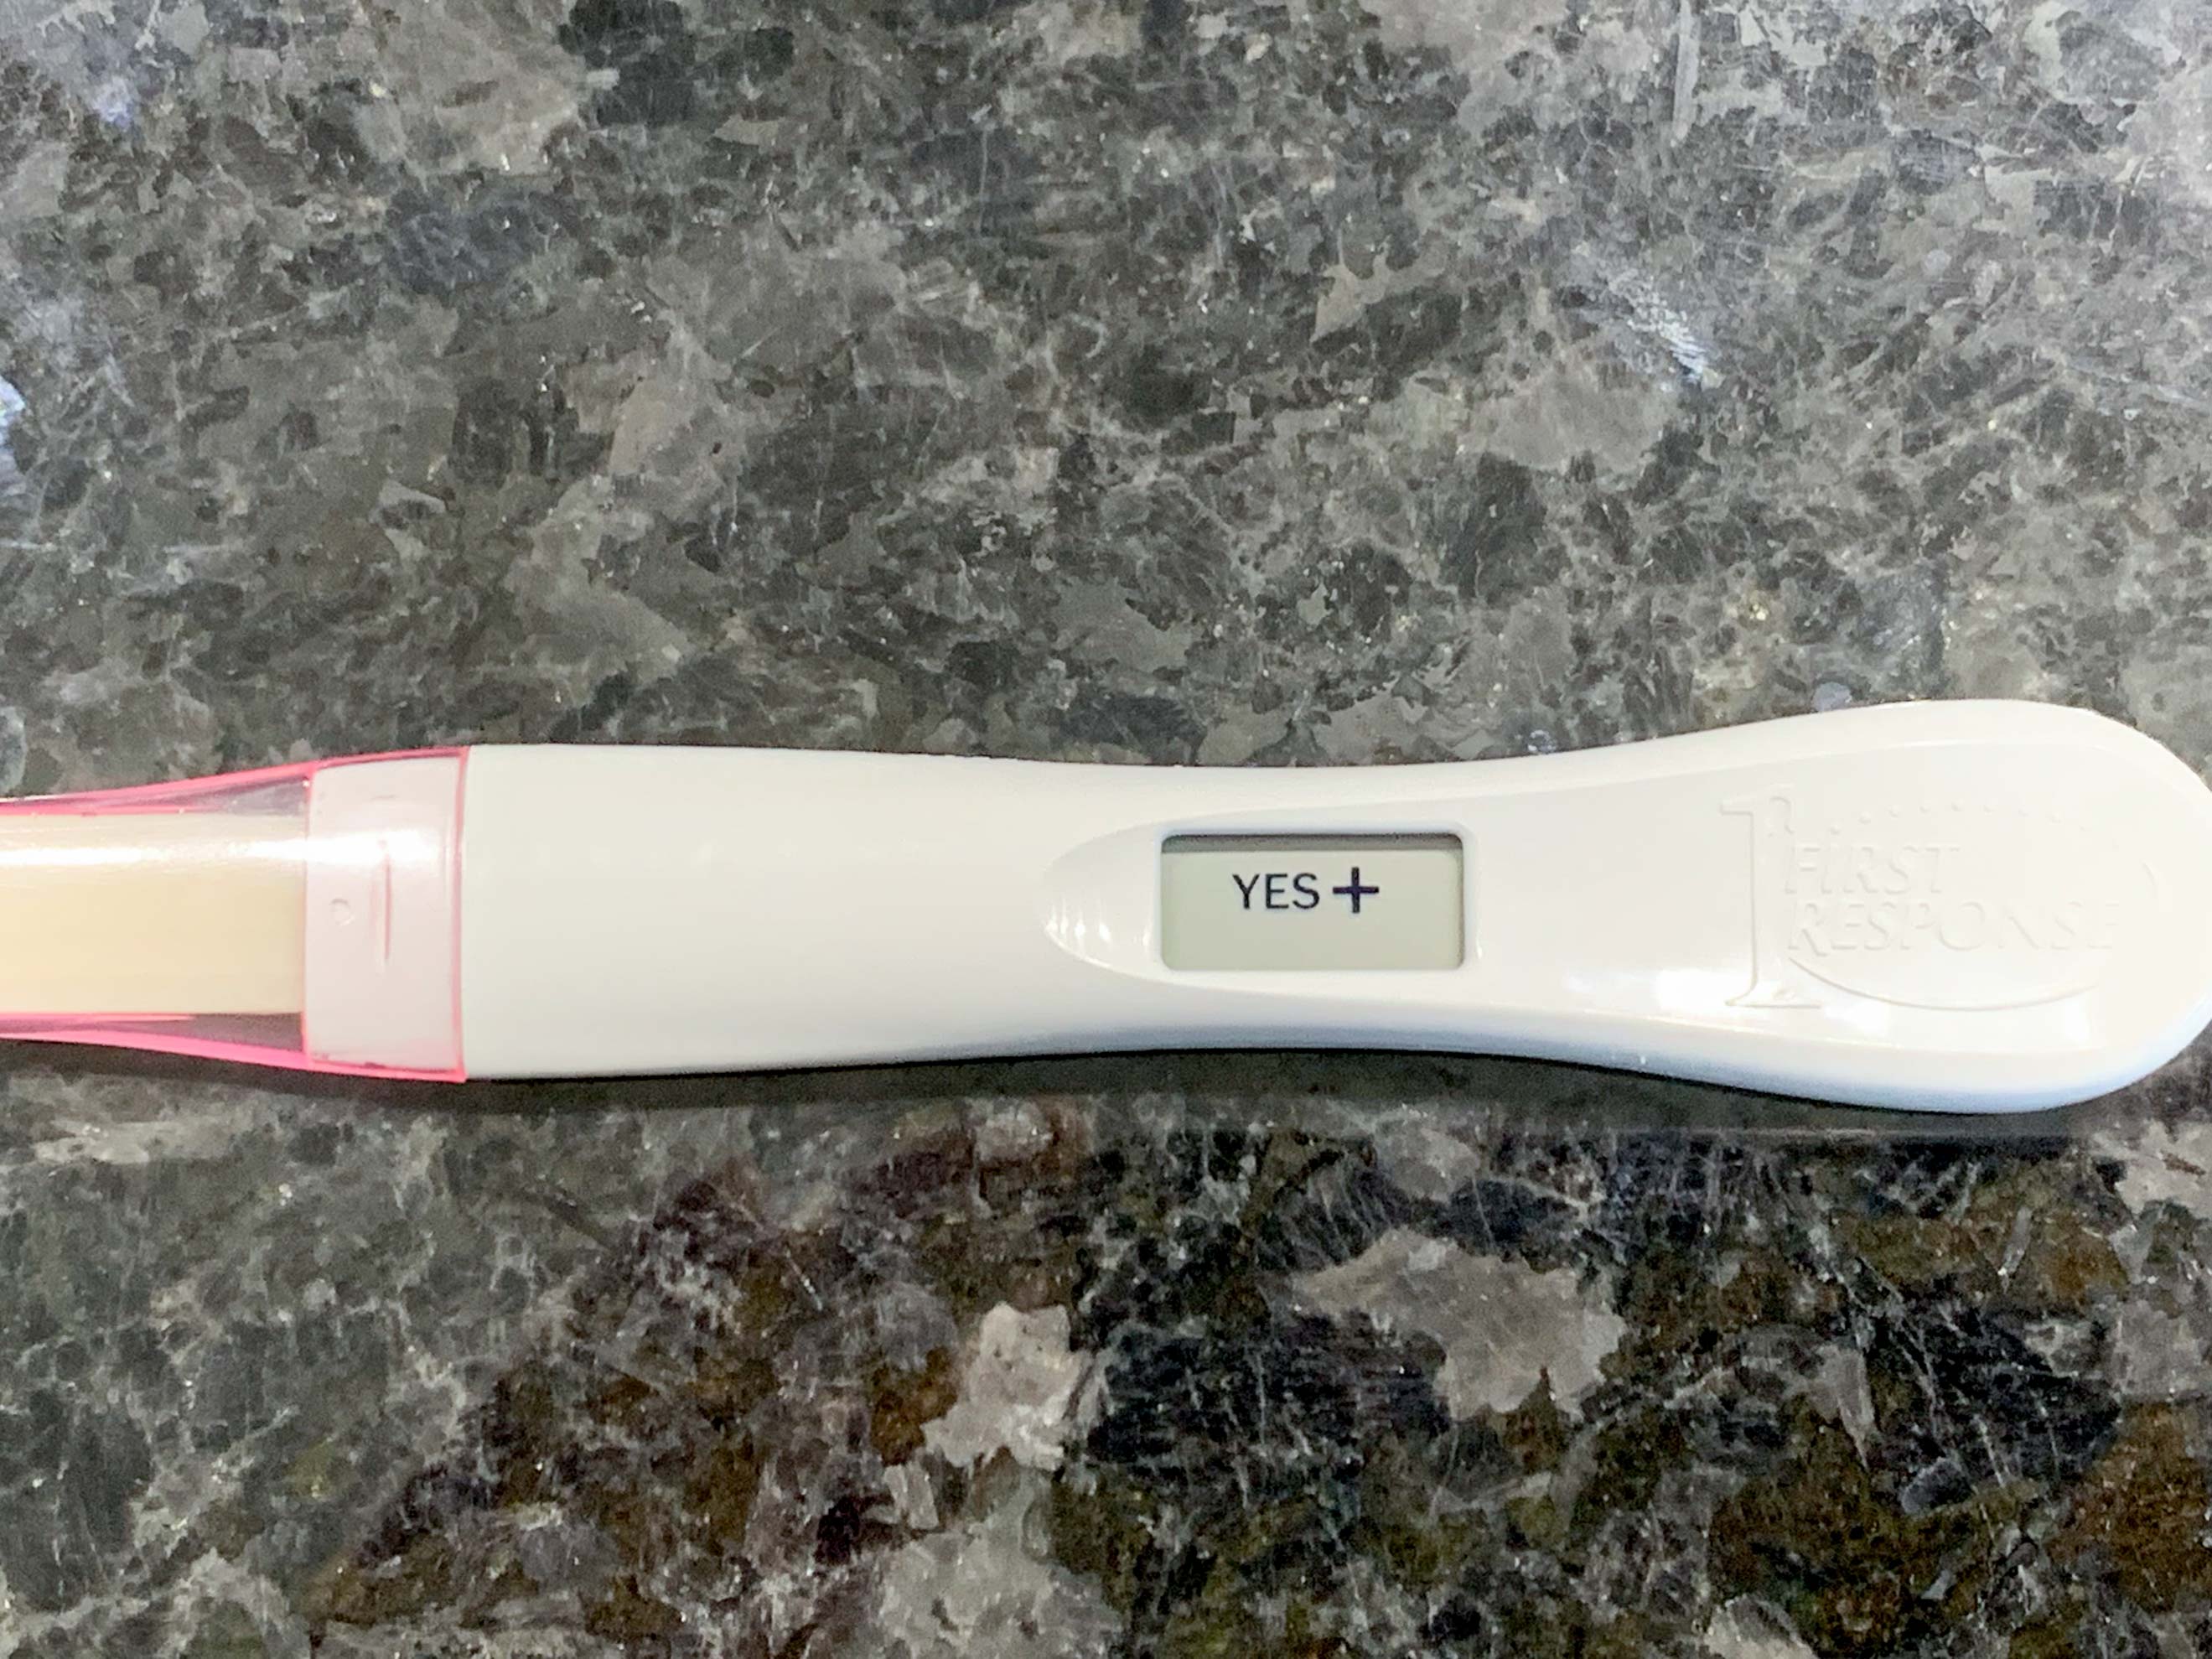 Positive pregnancy test for a Mosie Baby family